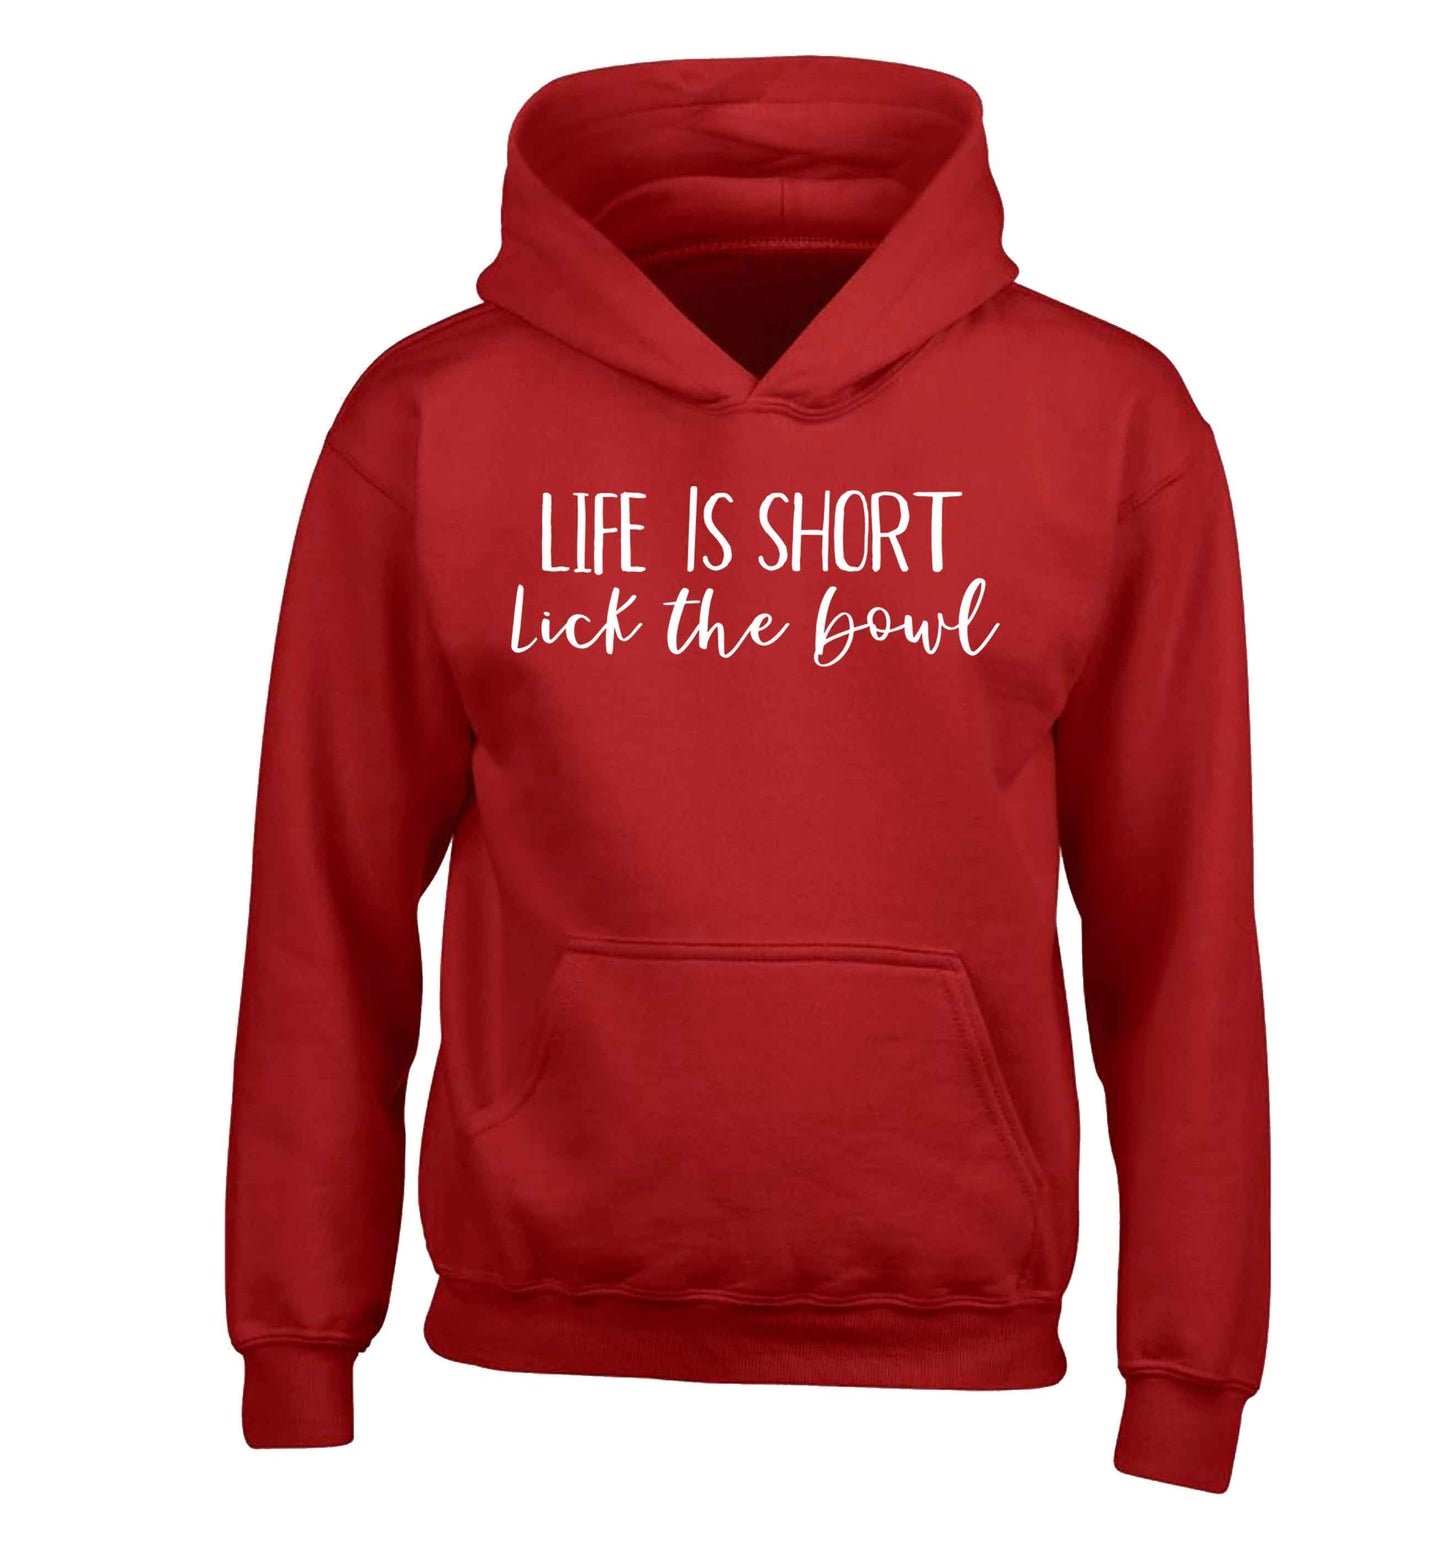 Life is short lick the bowl children's red hoodie 12-13 Years